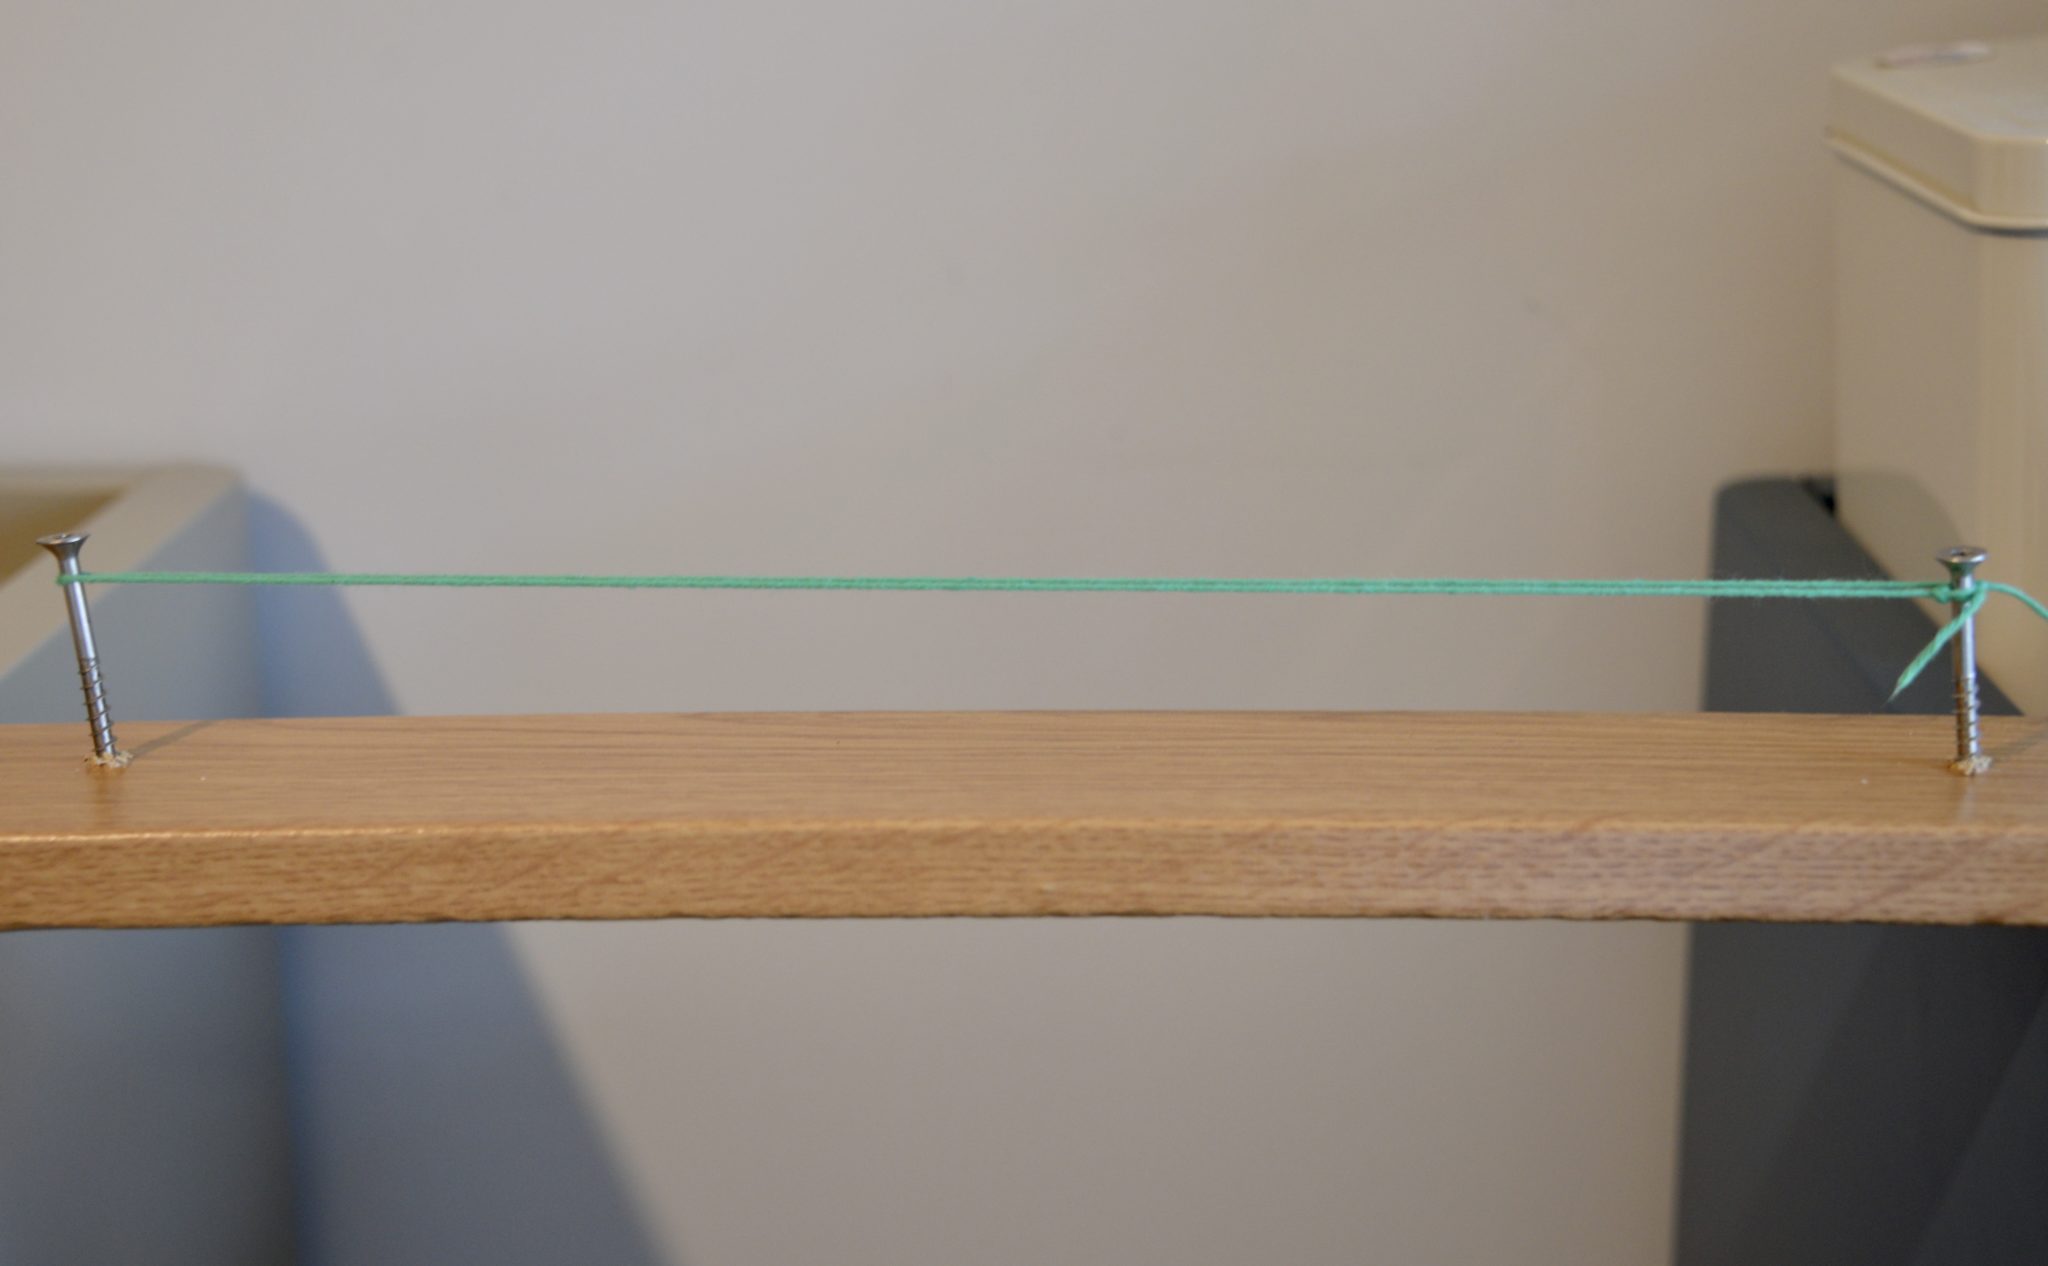 Transverse wave model 1 - image of a block of wood, with two screws and string between them